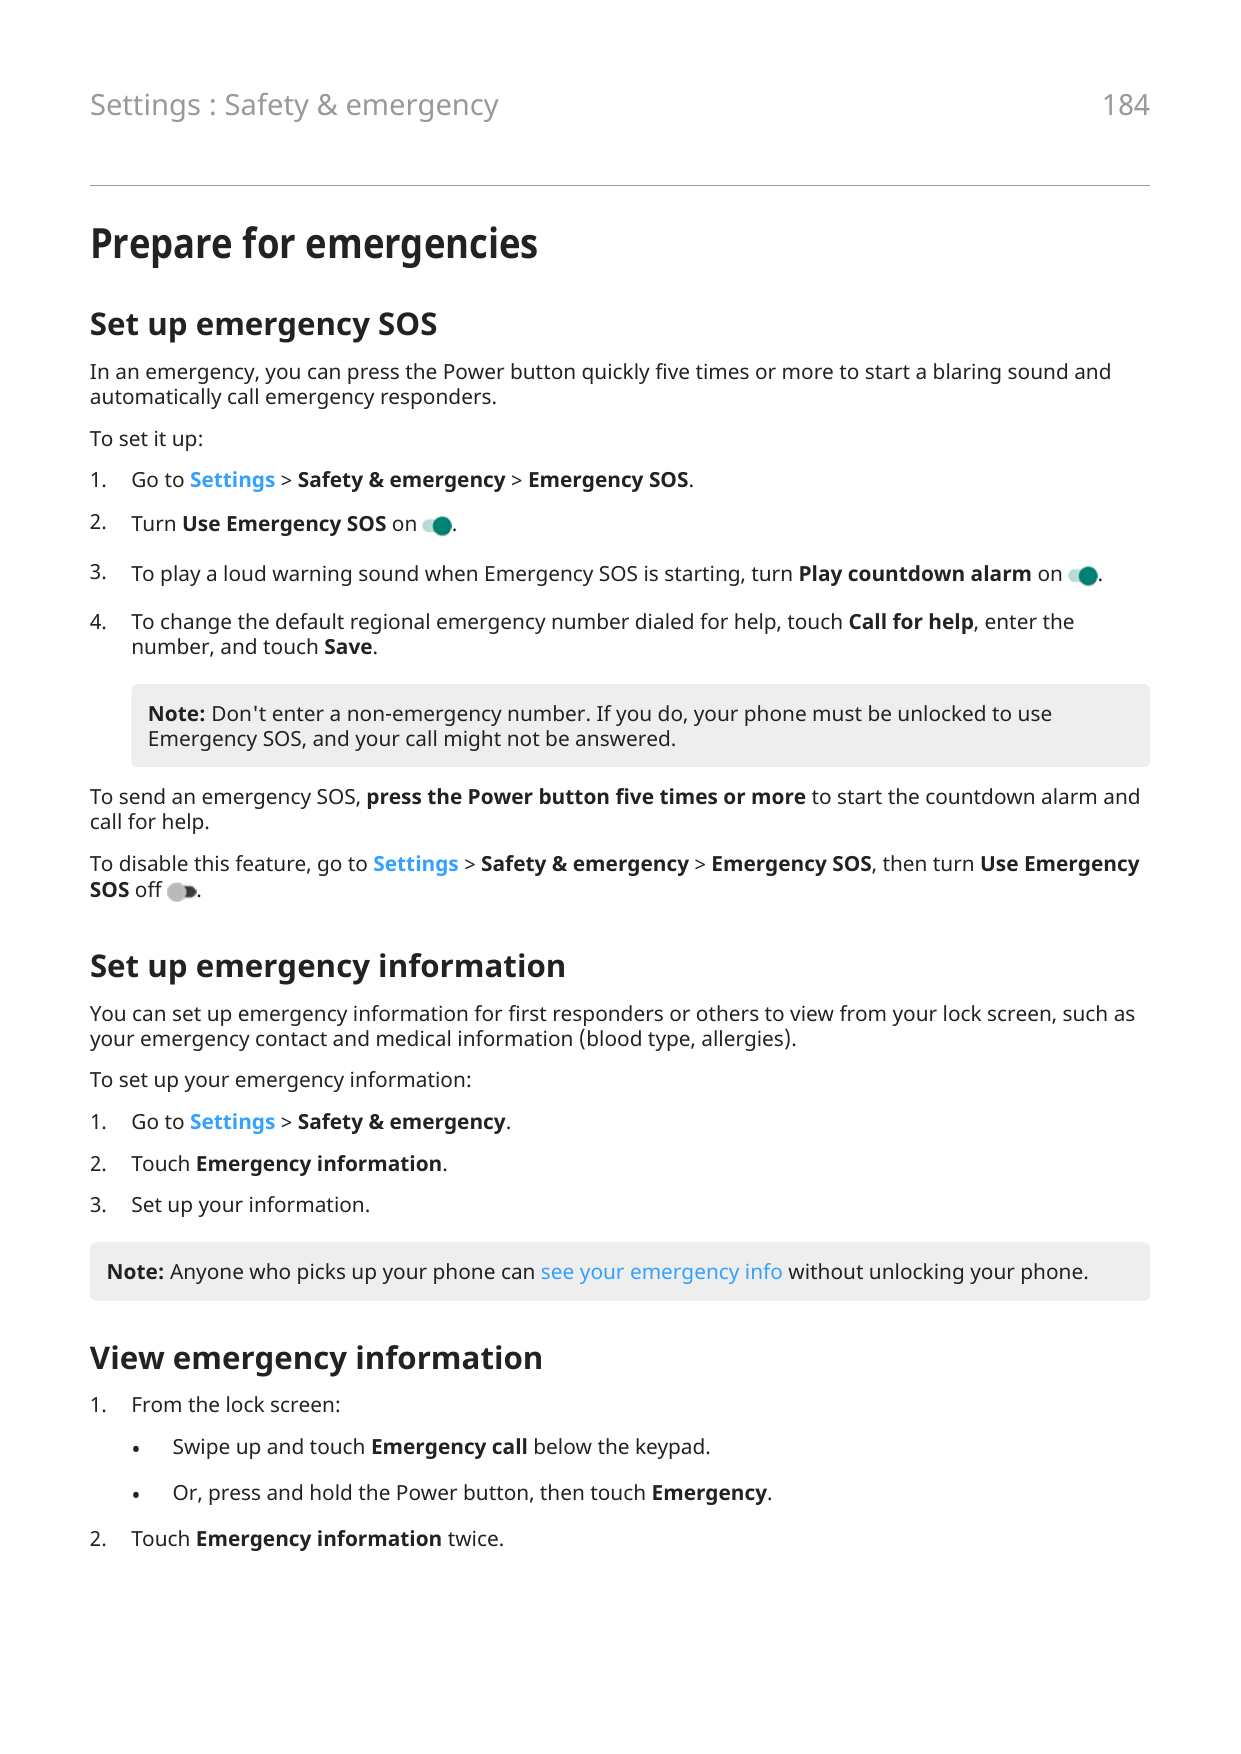 Settings : Safety & emergency184Prepare for emergenciesSet up emergency SOSIn an emergency, you can press the Power button quick